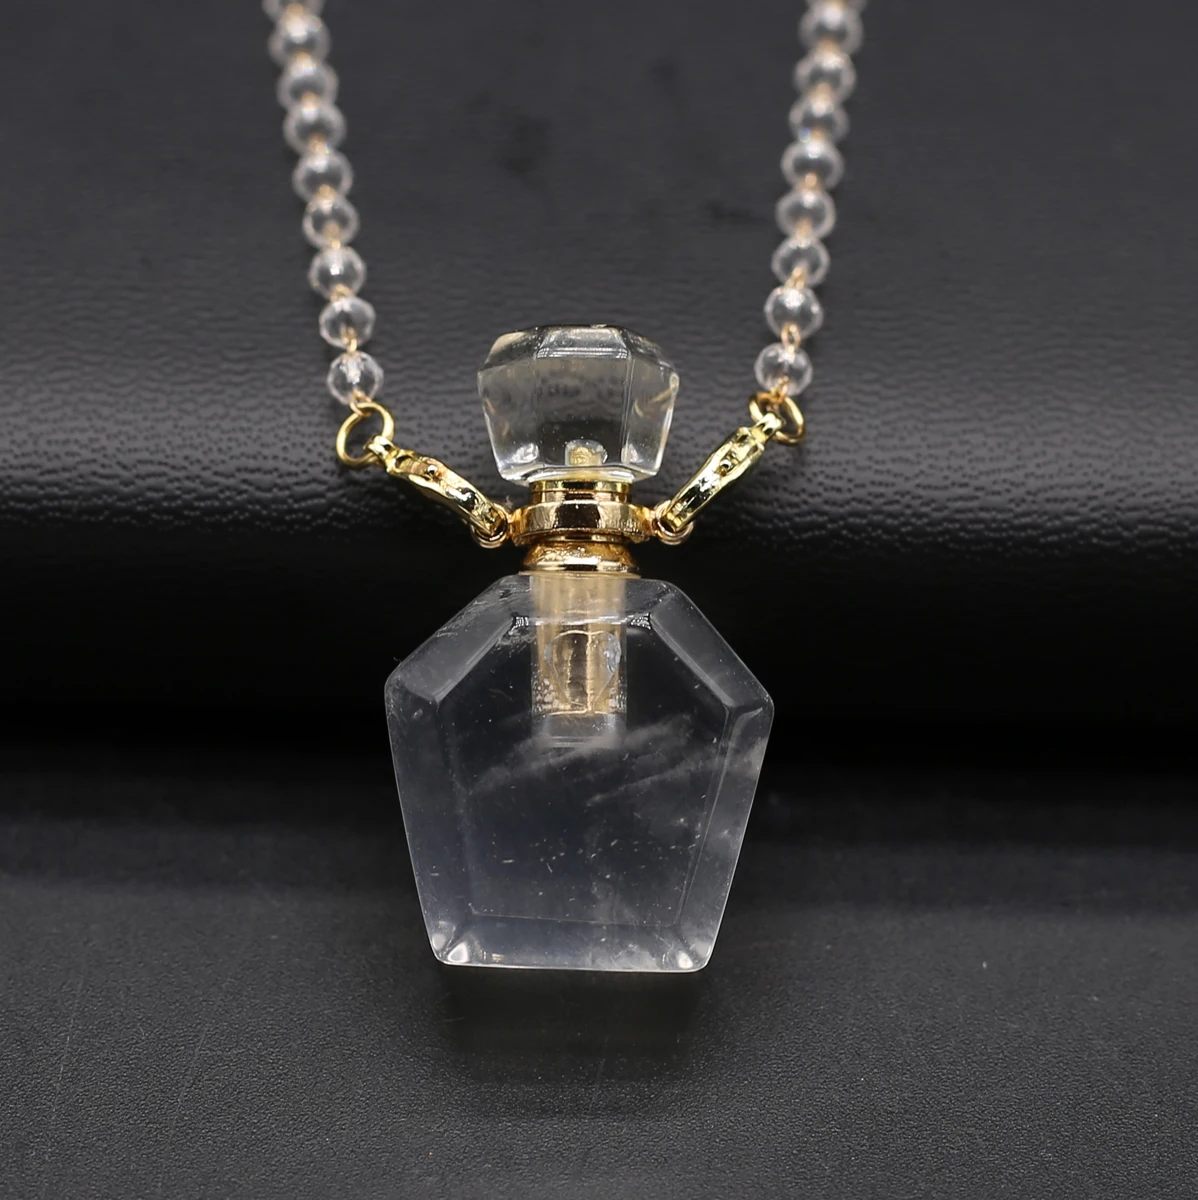 

Natural Stones Clear Quartz Perfume Bottle Pendants Necklace Crystals Chain Essential Oil Diffuser Necklaces for Women Jewelry